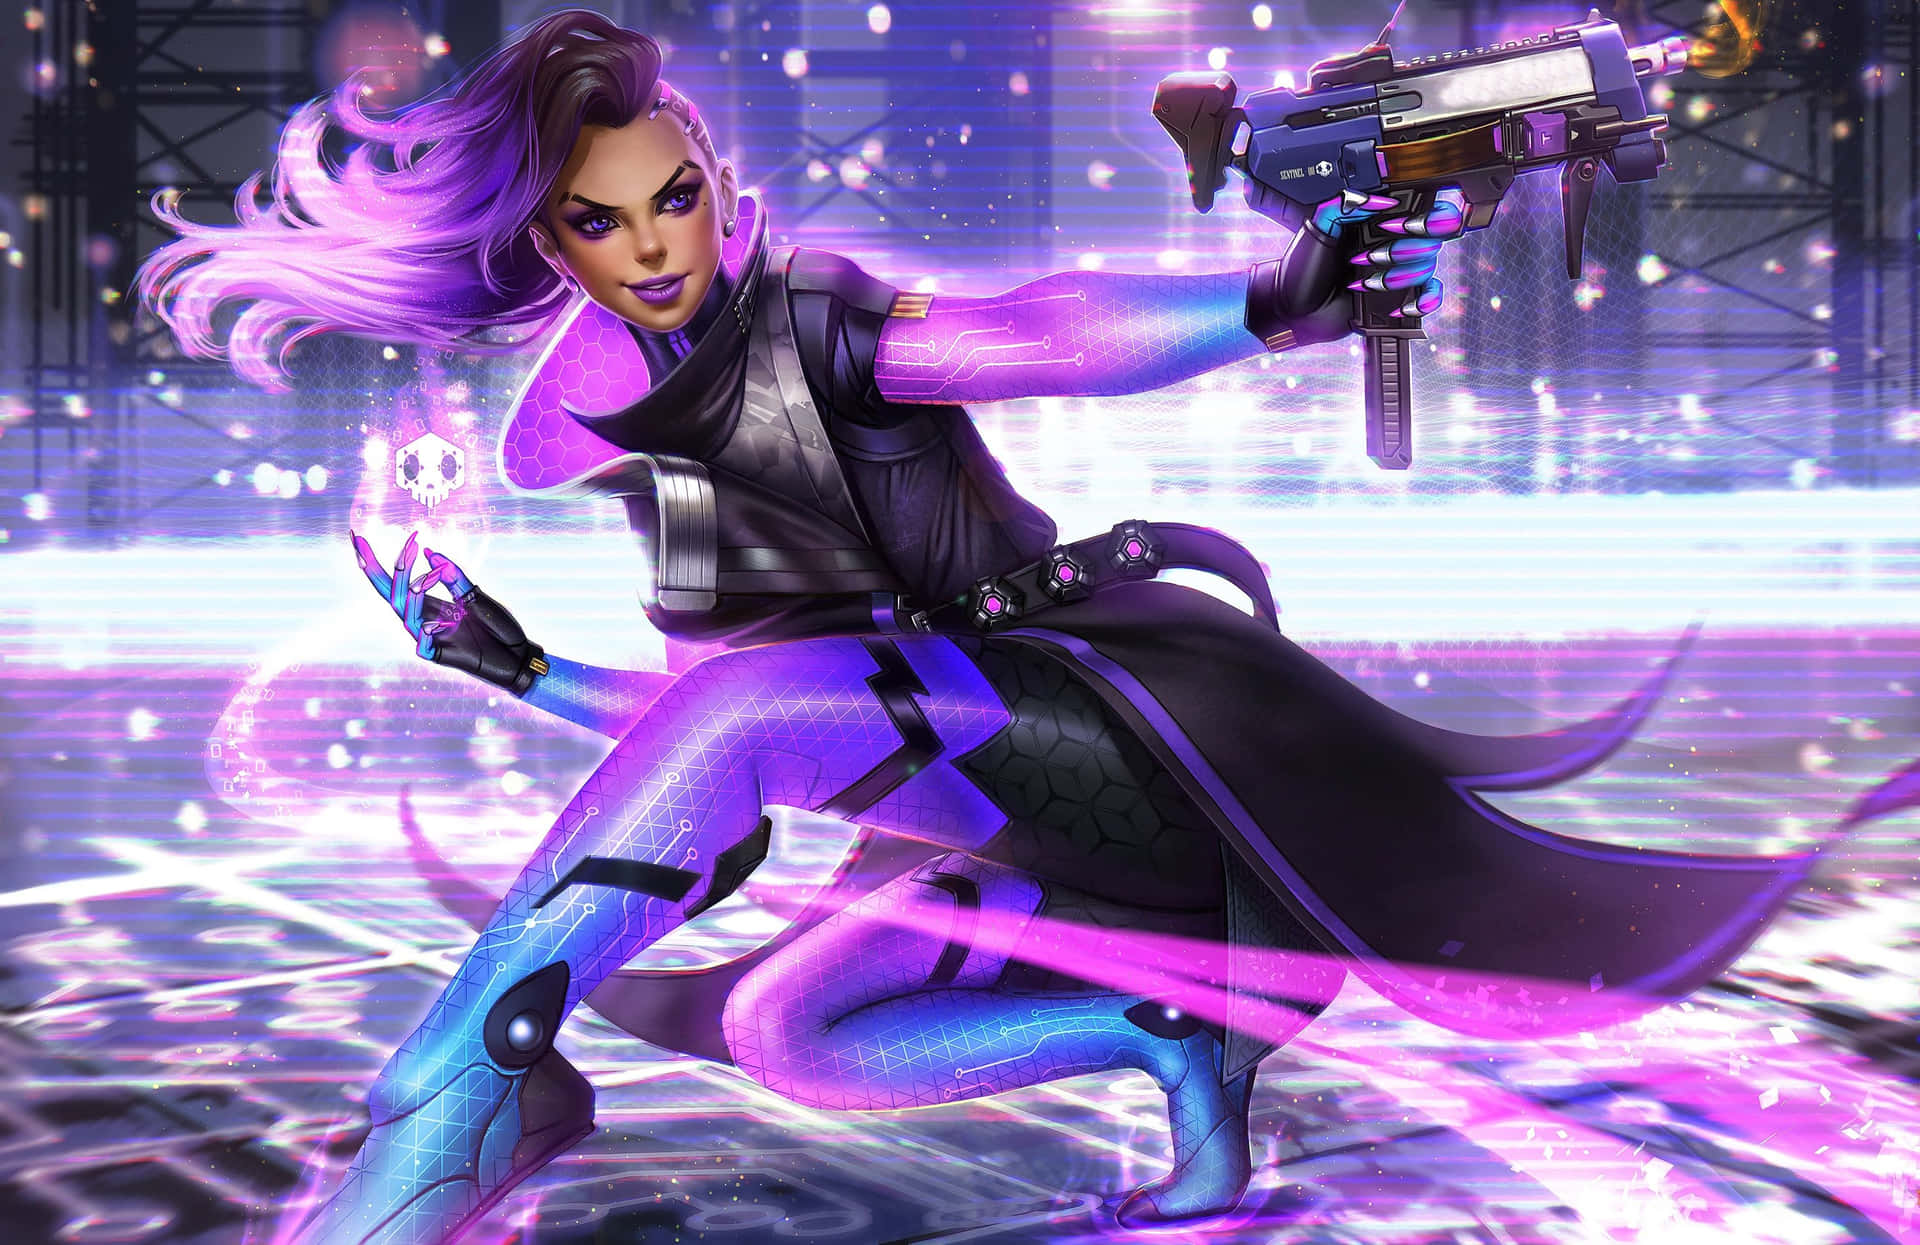 Sombra - Master of Stealth and Hacking in Overwatch. Wallpaper